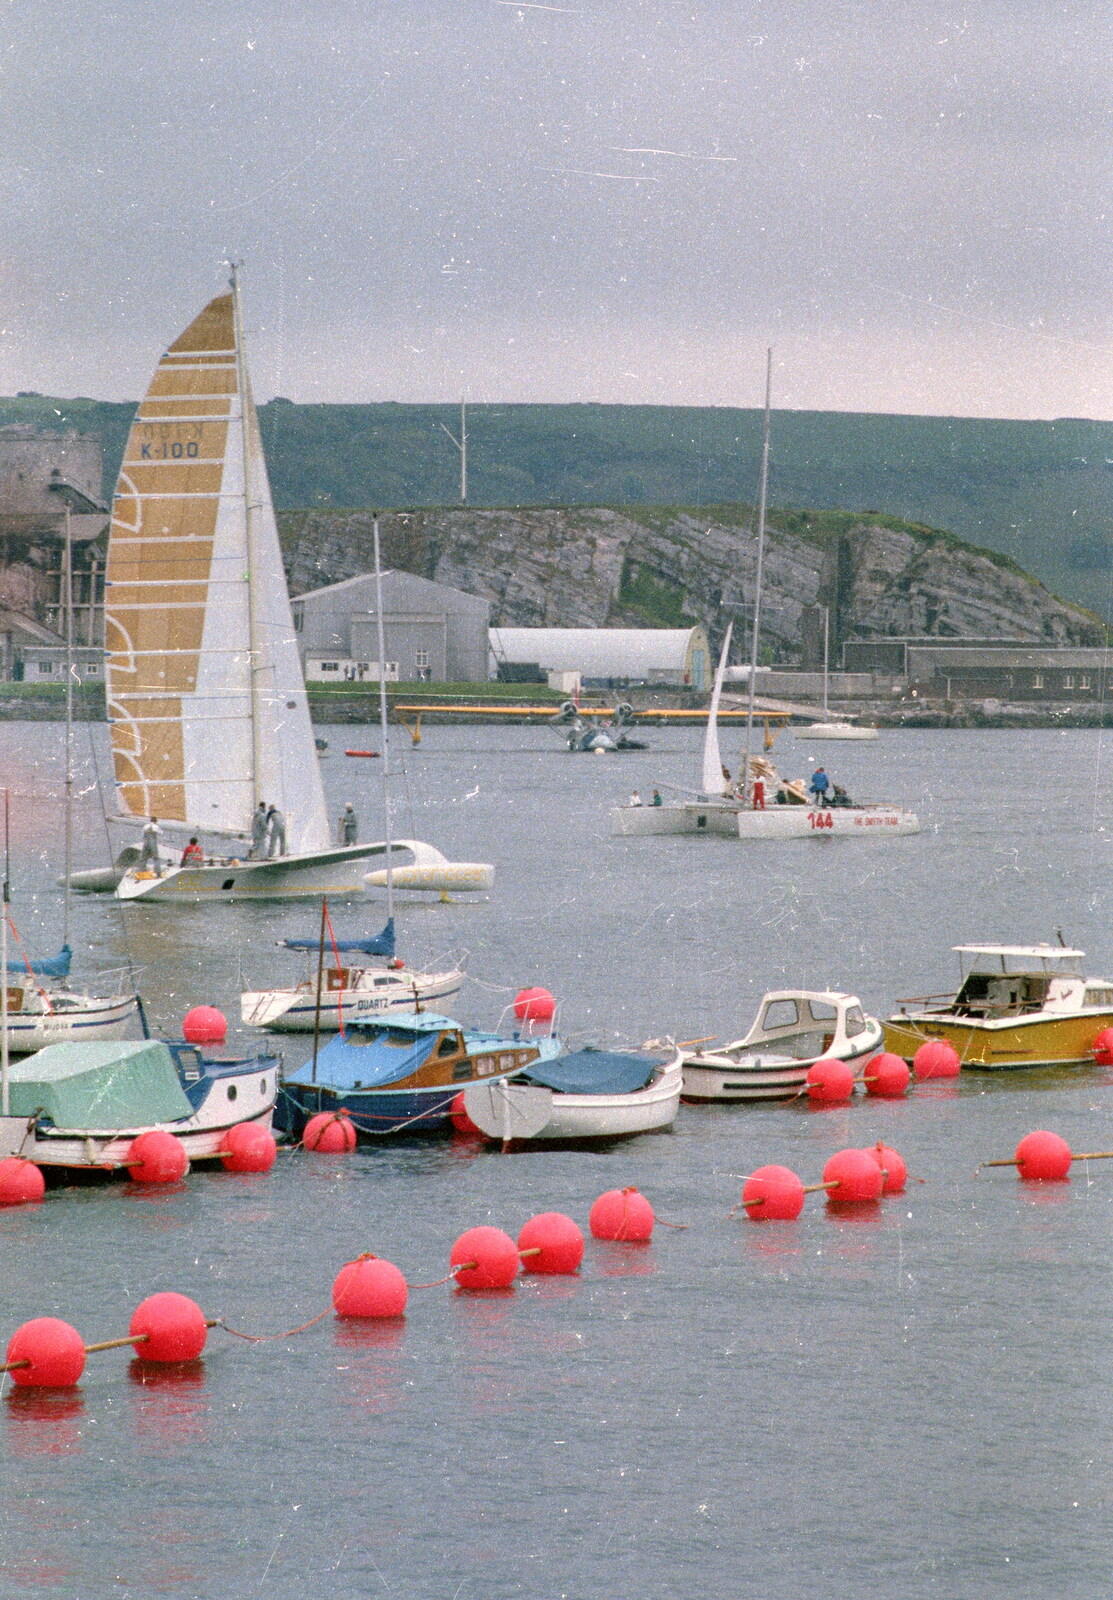 Pink buoys around the Yacht Marina from Uni: The Navy-Curtiss NC-4 Trans-Atlantic Flight, Plymouth Sound - 31st May 1986